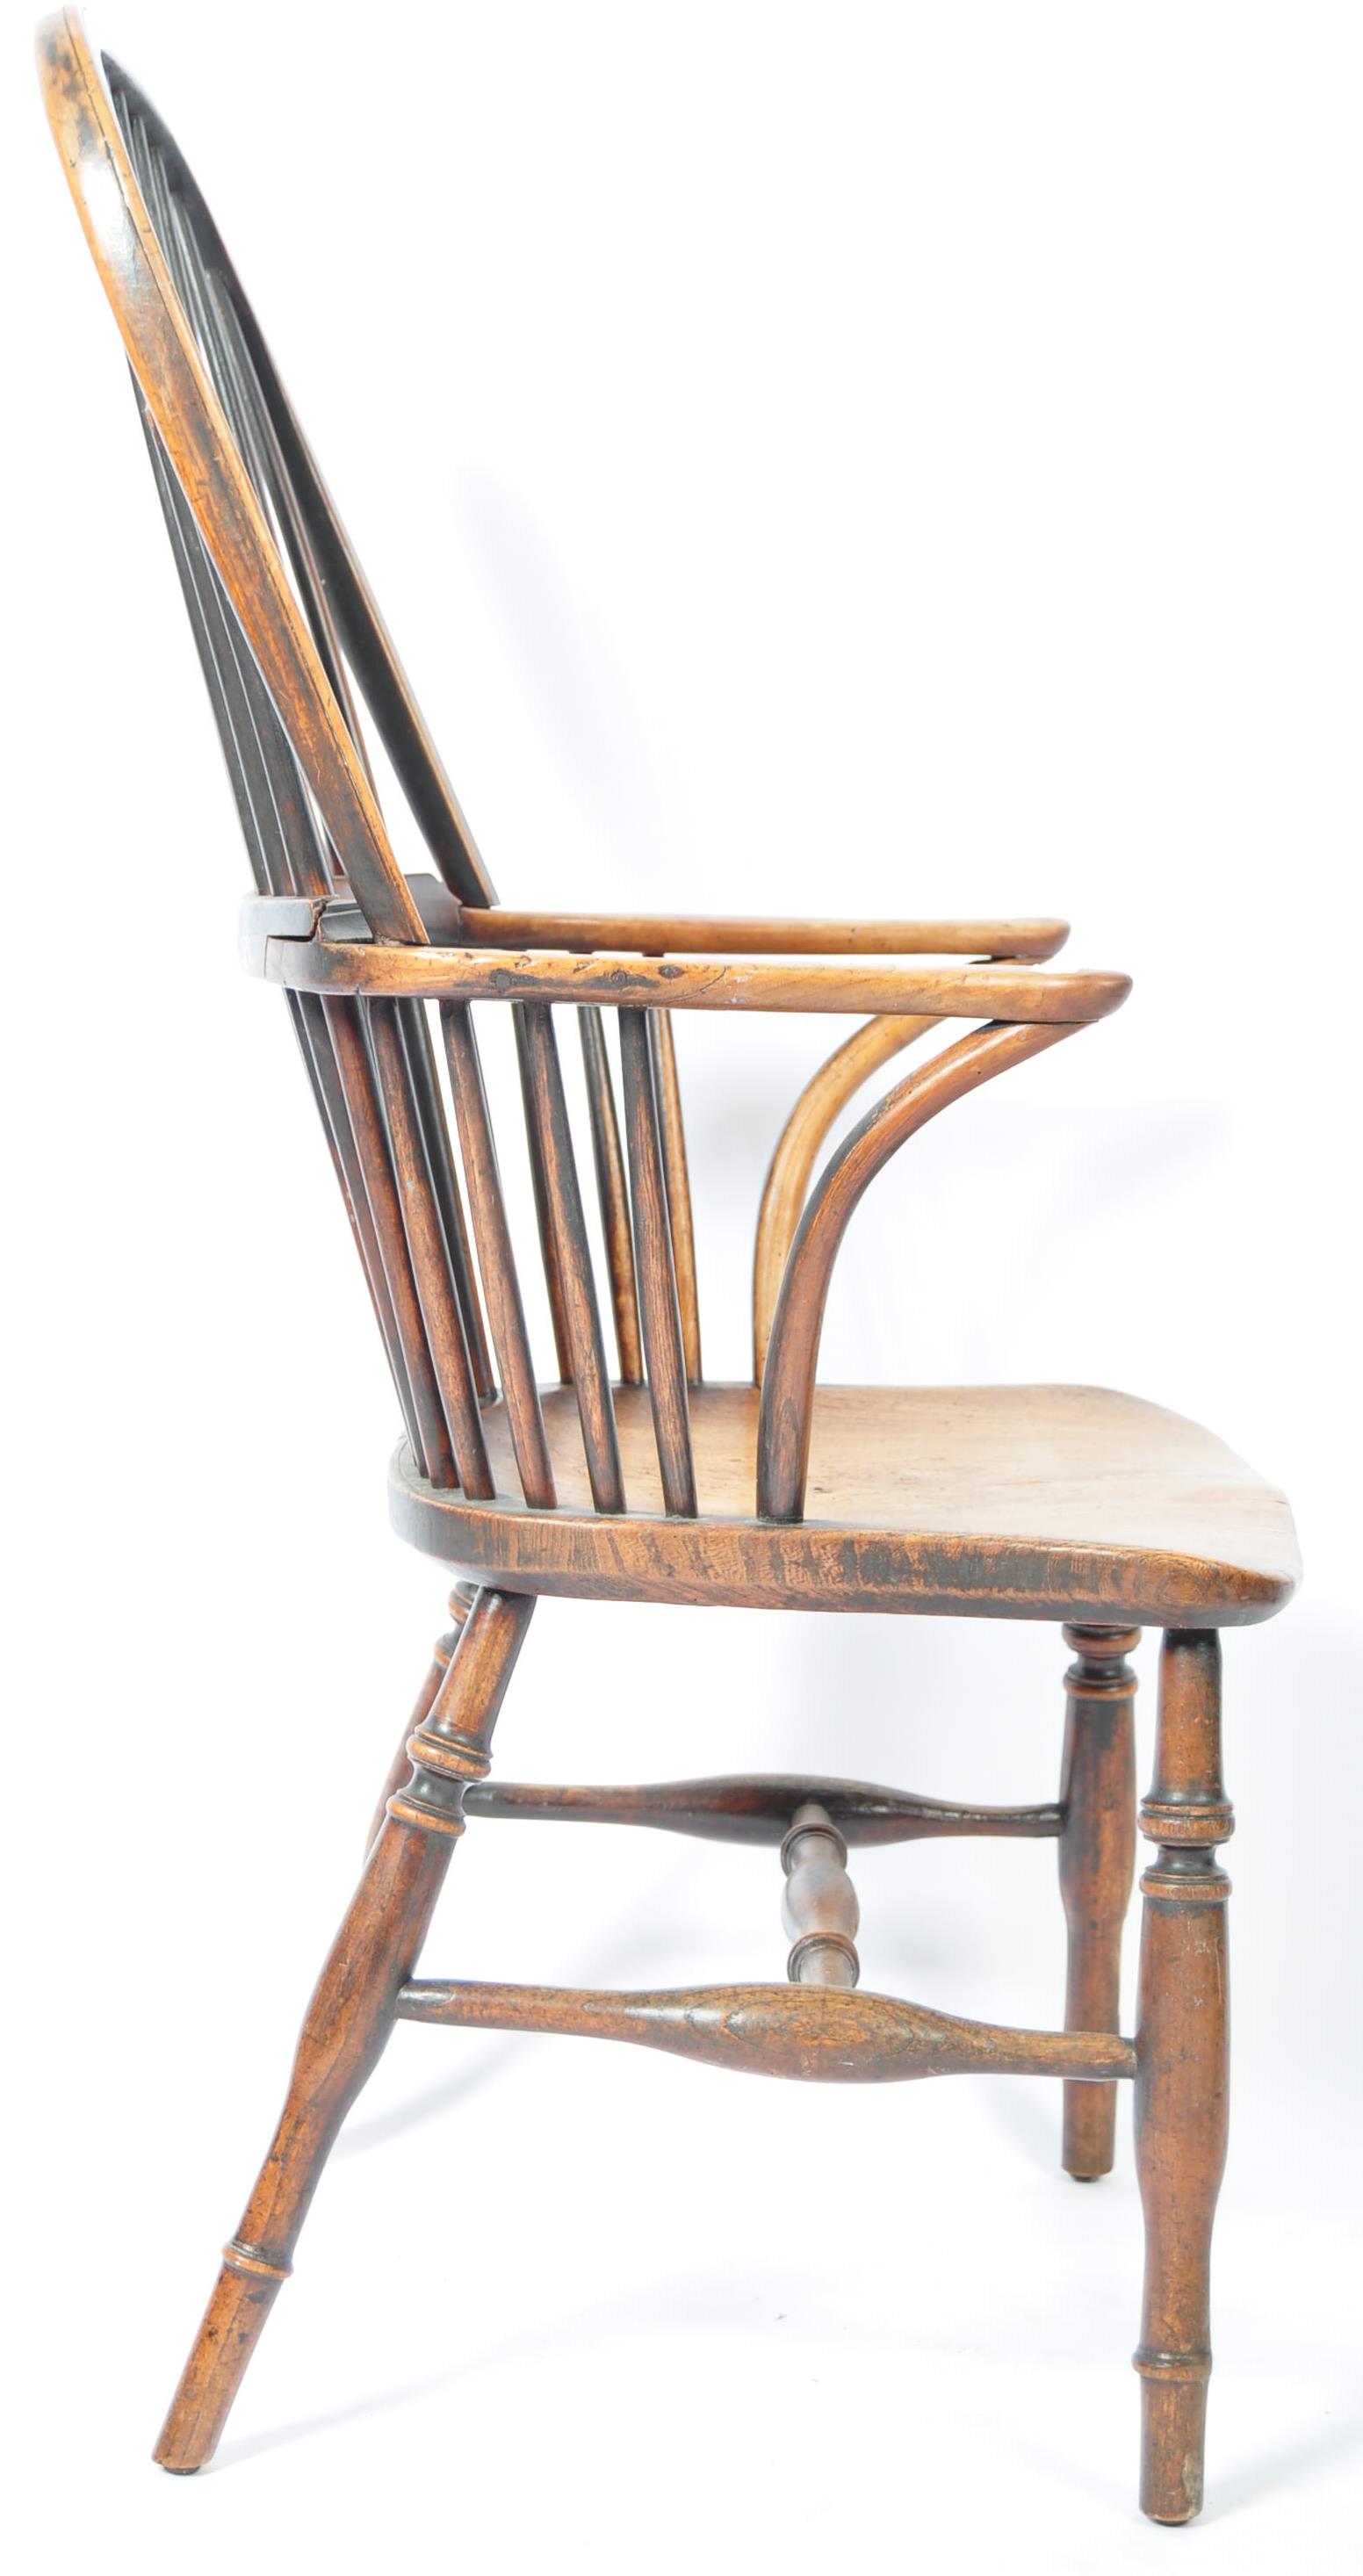 19TH CENTURY ENGLISH ANTIQUE BEECH AND ELM WINDSOR CHAIR - Image 5 of 7